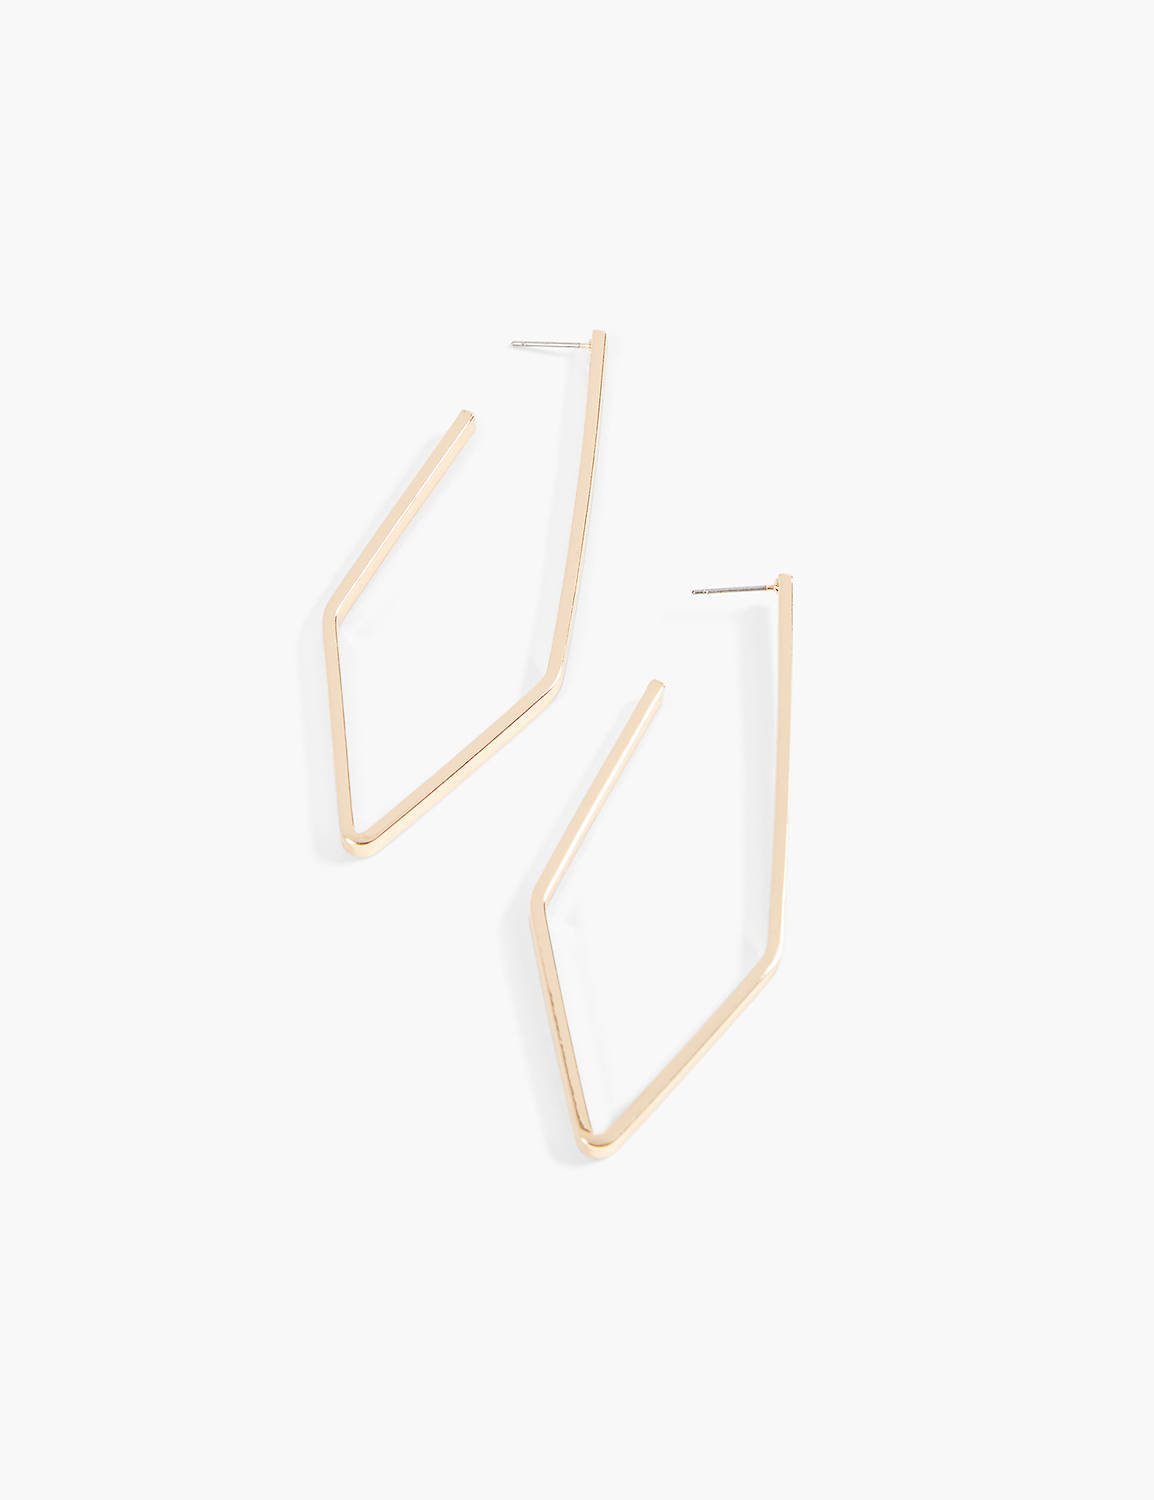 GEO OVAL HOOP EARRING:Gold Tone:ONESZ Product Image 1